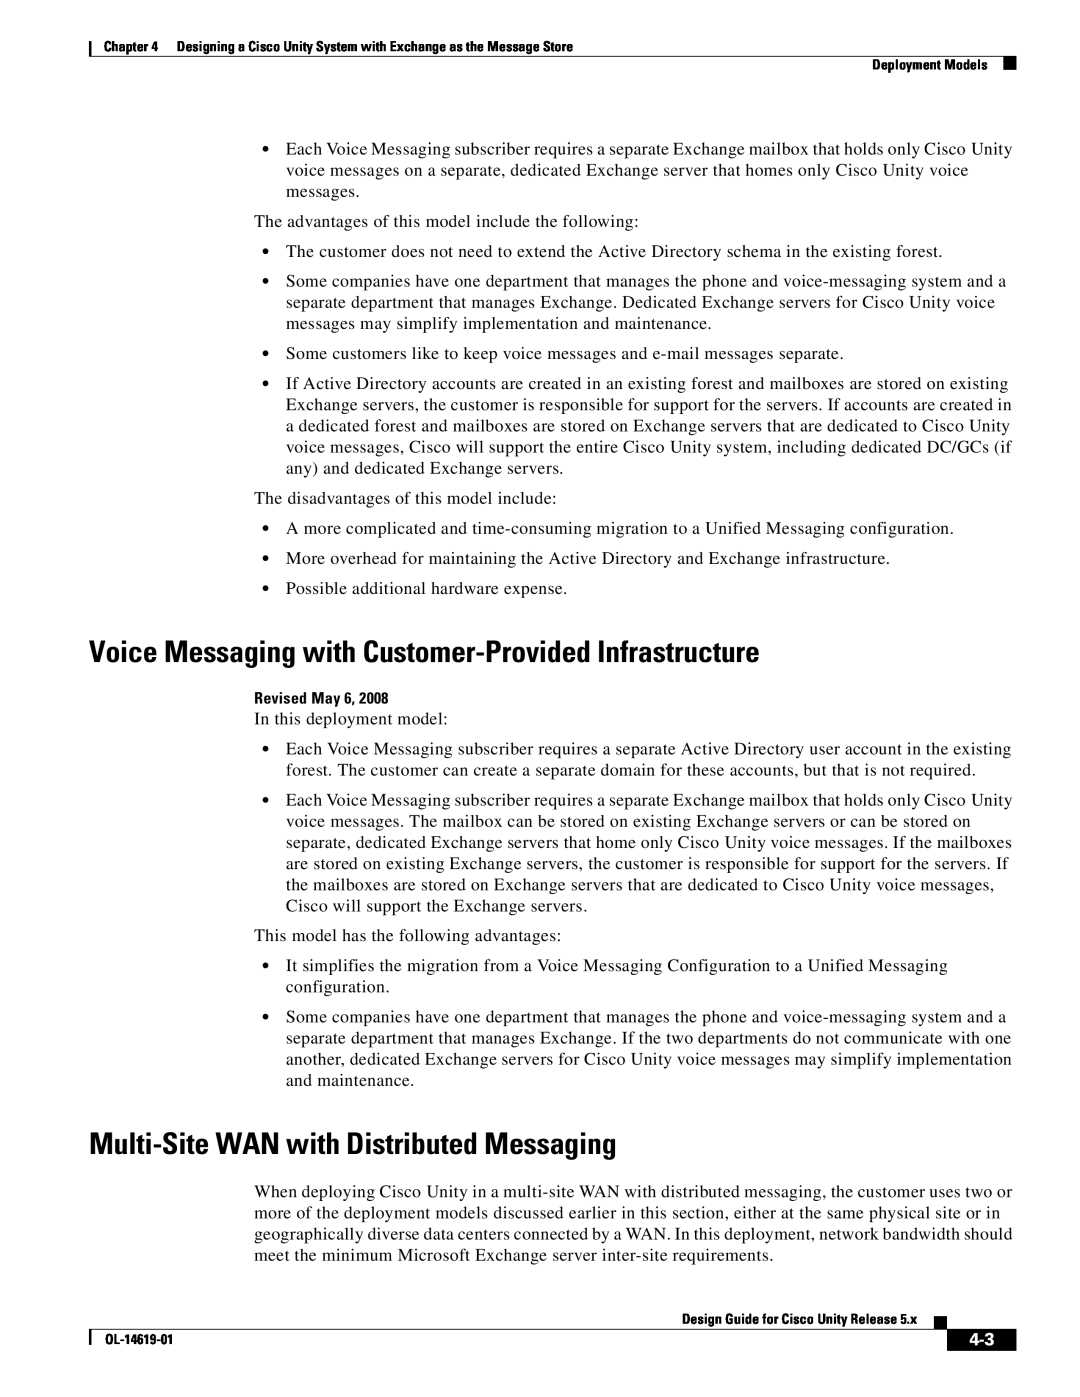 Cisco Systems OL-14619-01 Voice Messaging with Customer-Provided Infrastructure, Multi-Site WAN with Distributed Messaging 